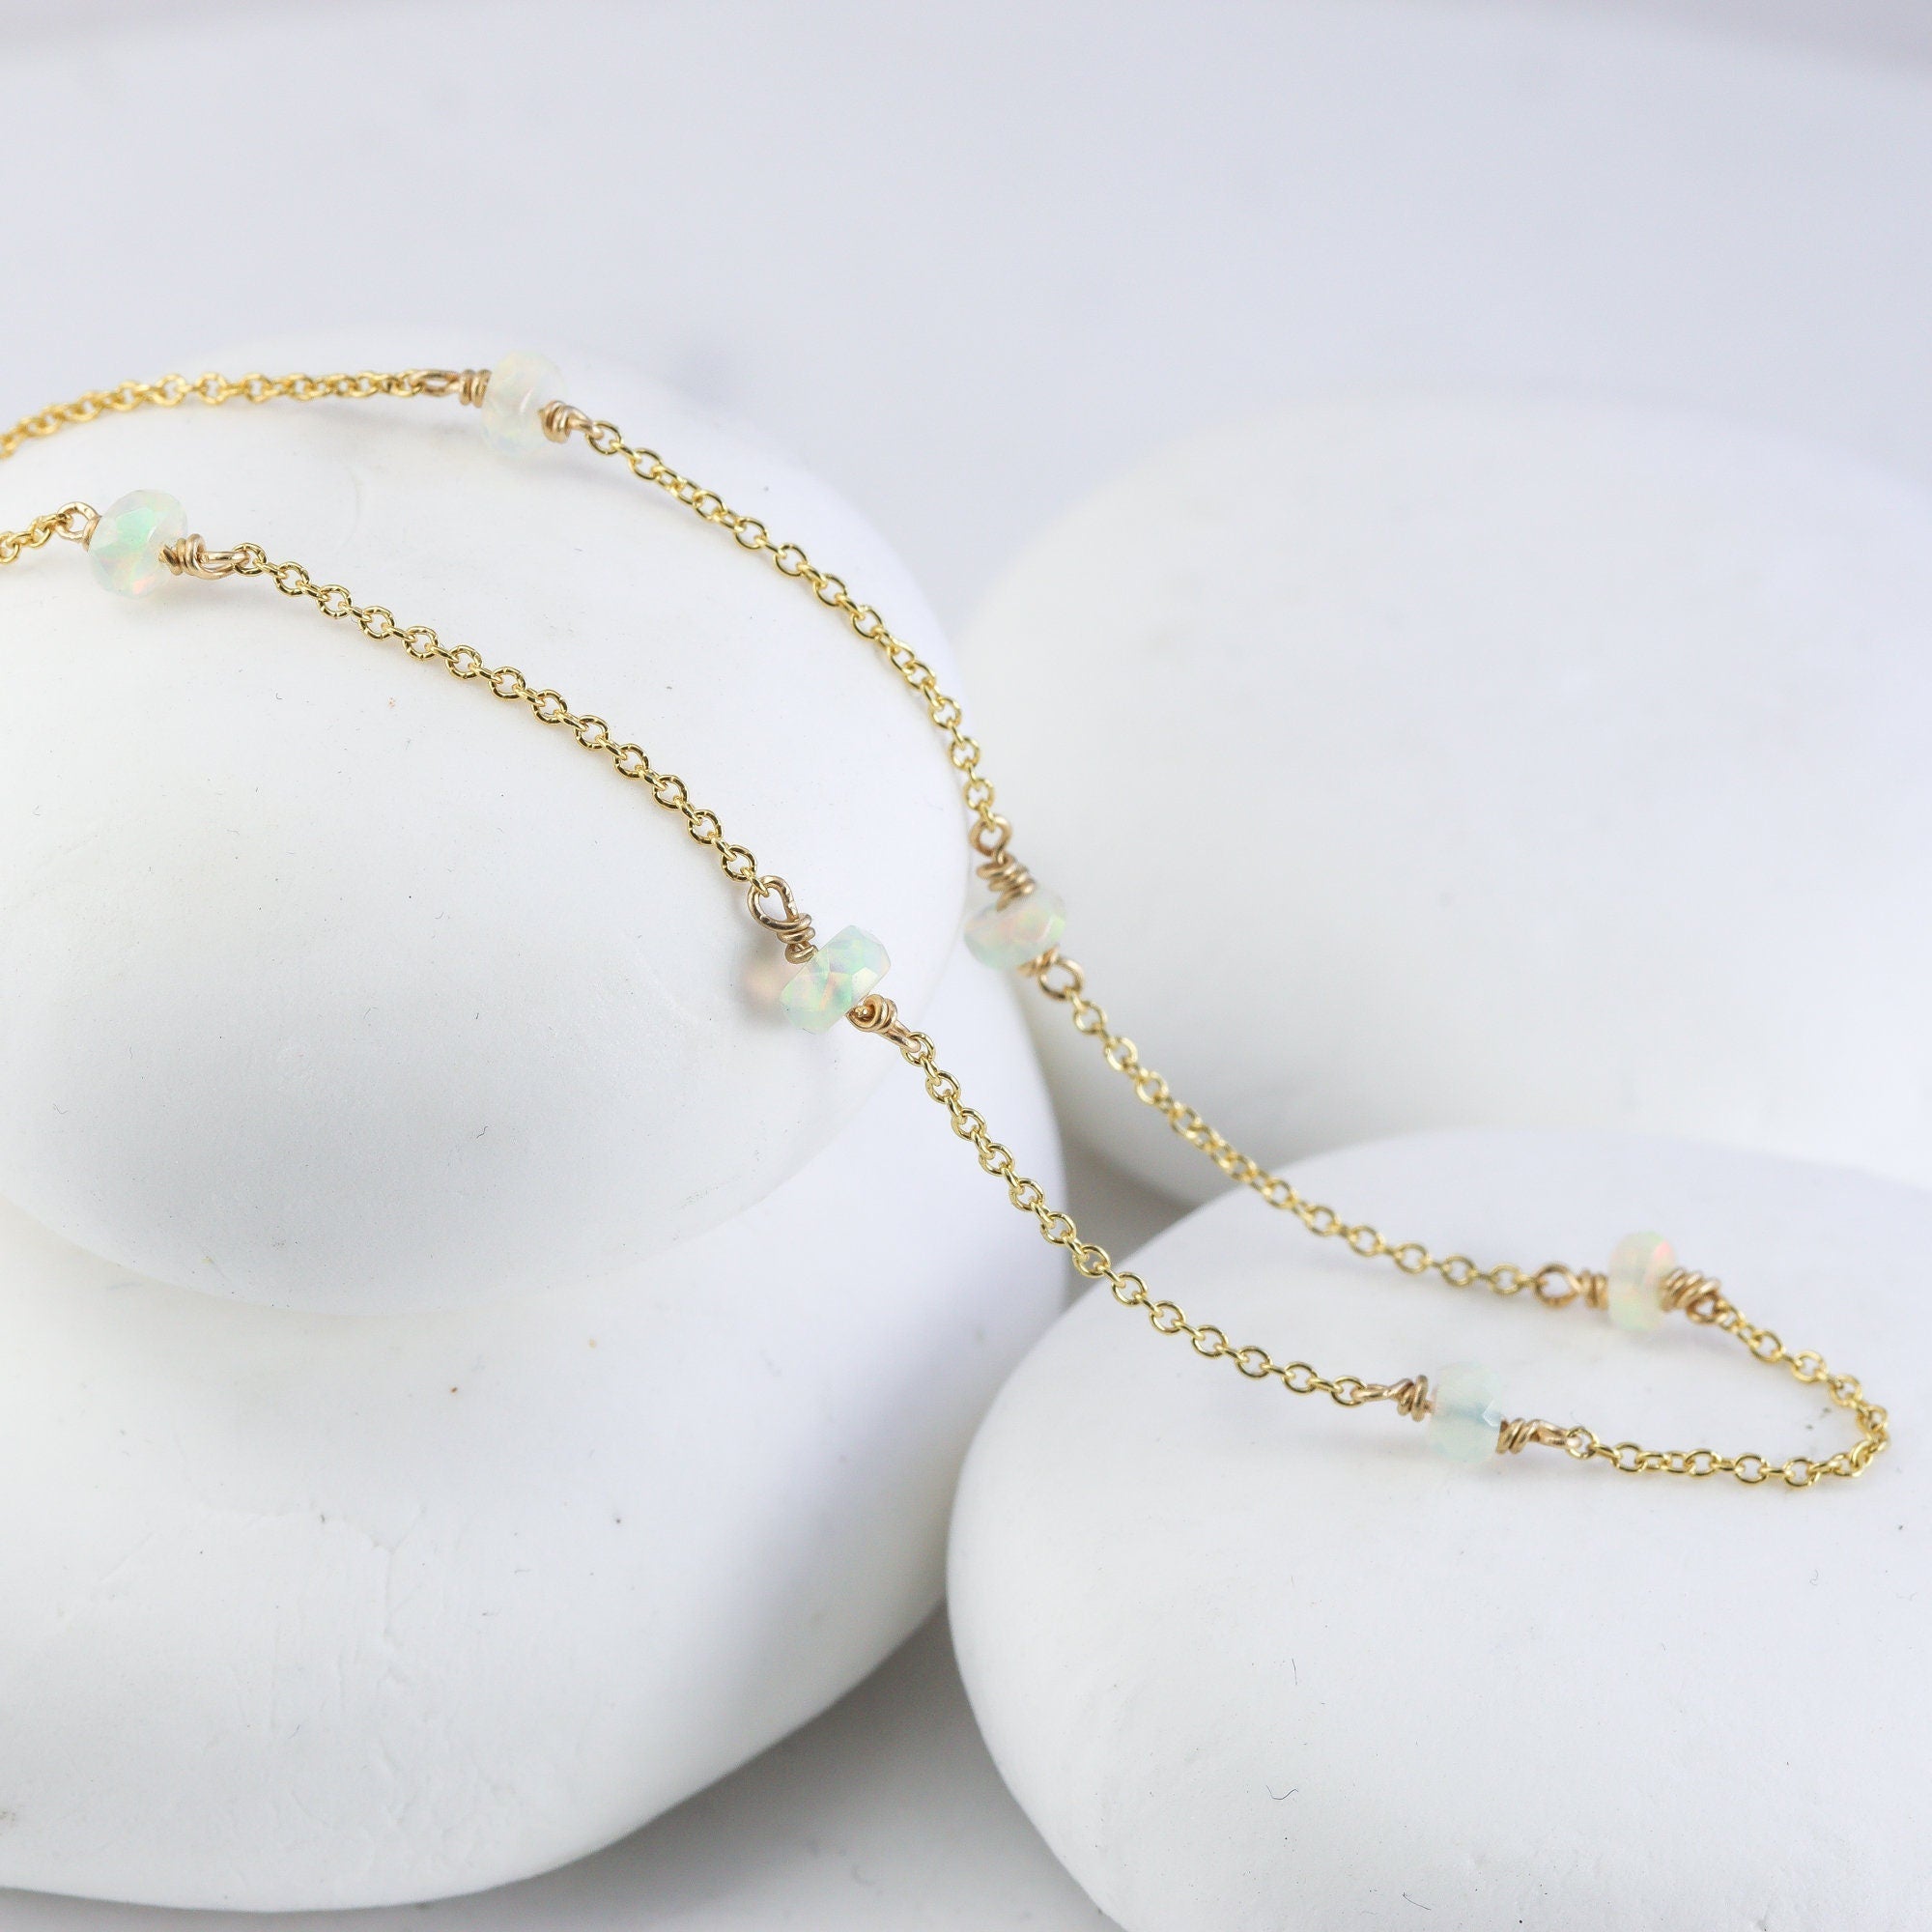 Floating White Opal Necklace with tiny Genuine Opal Stones